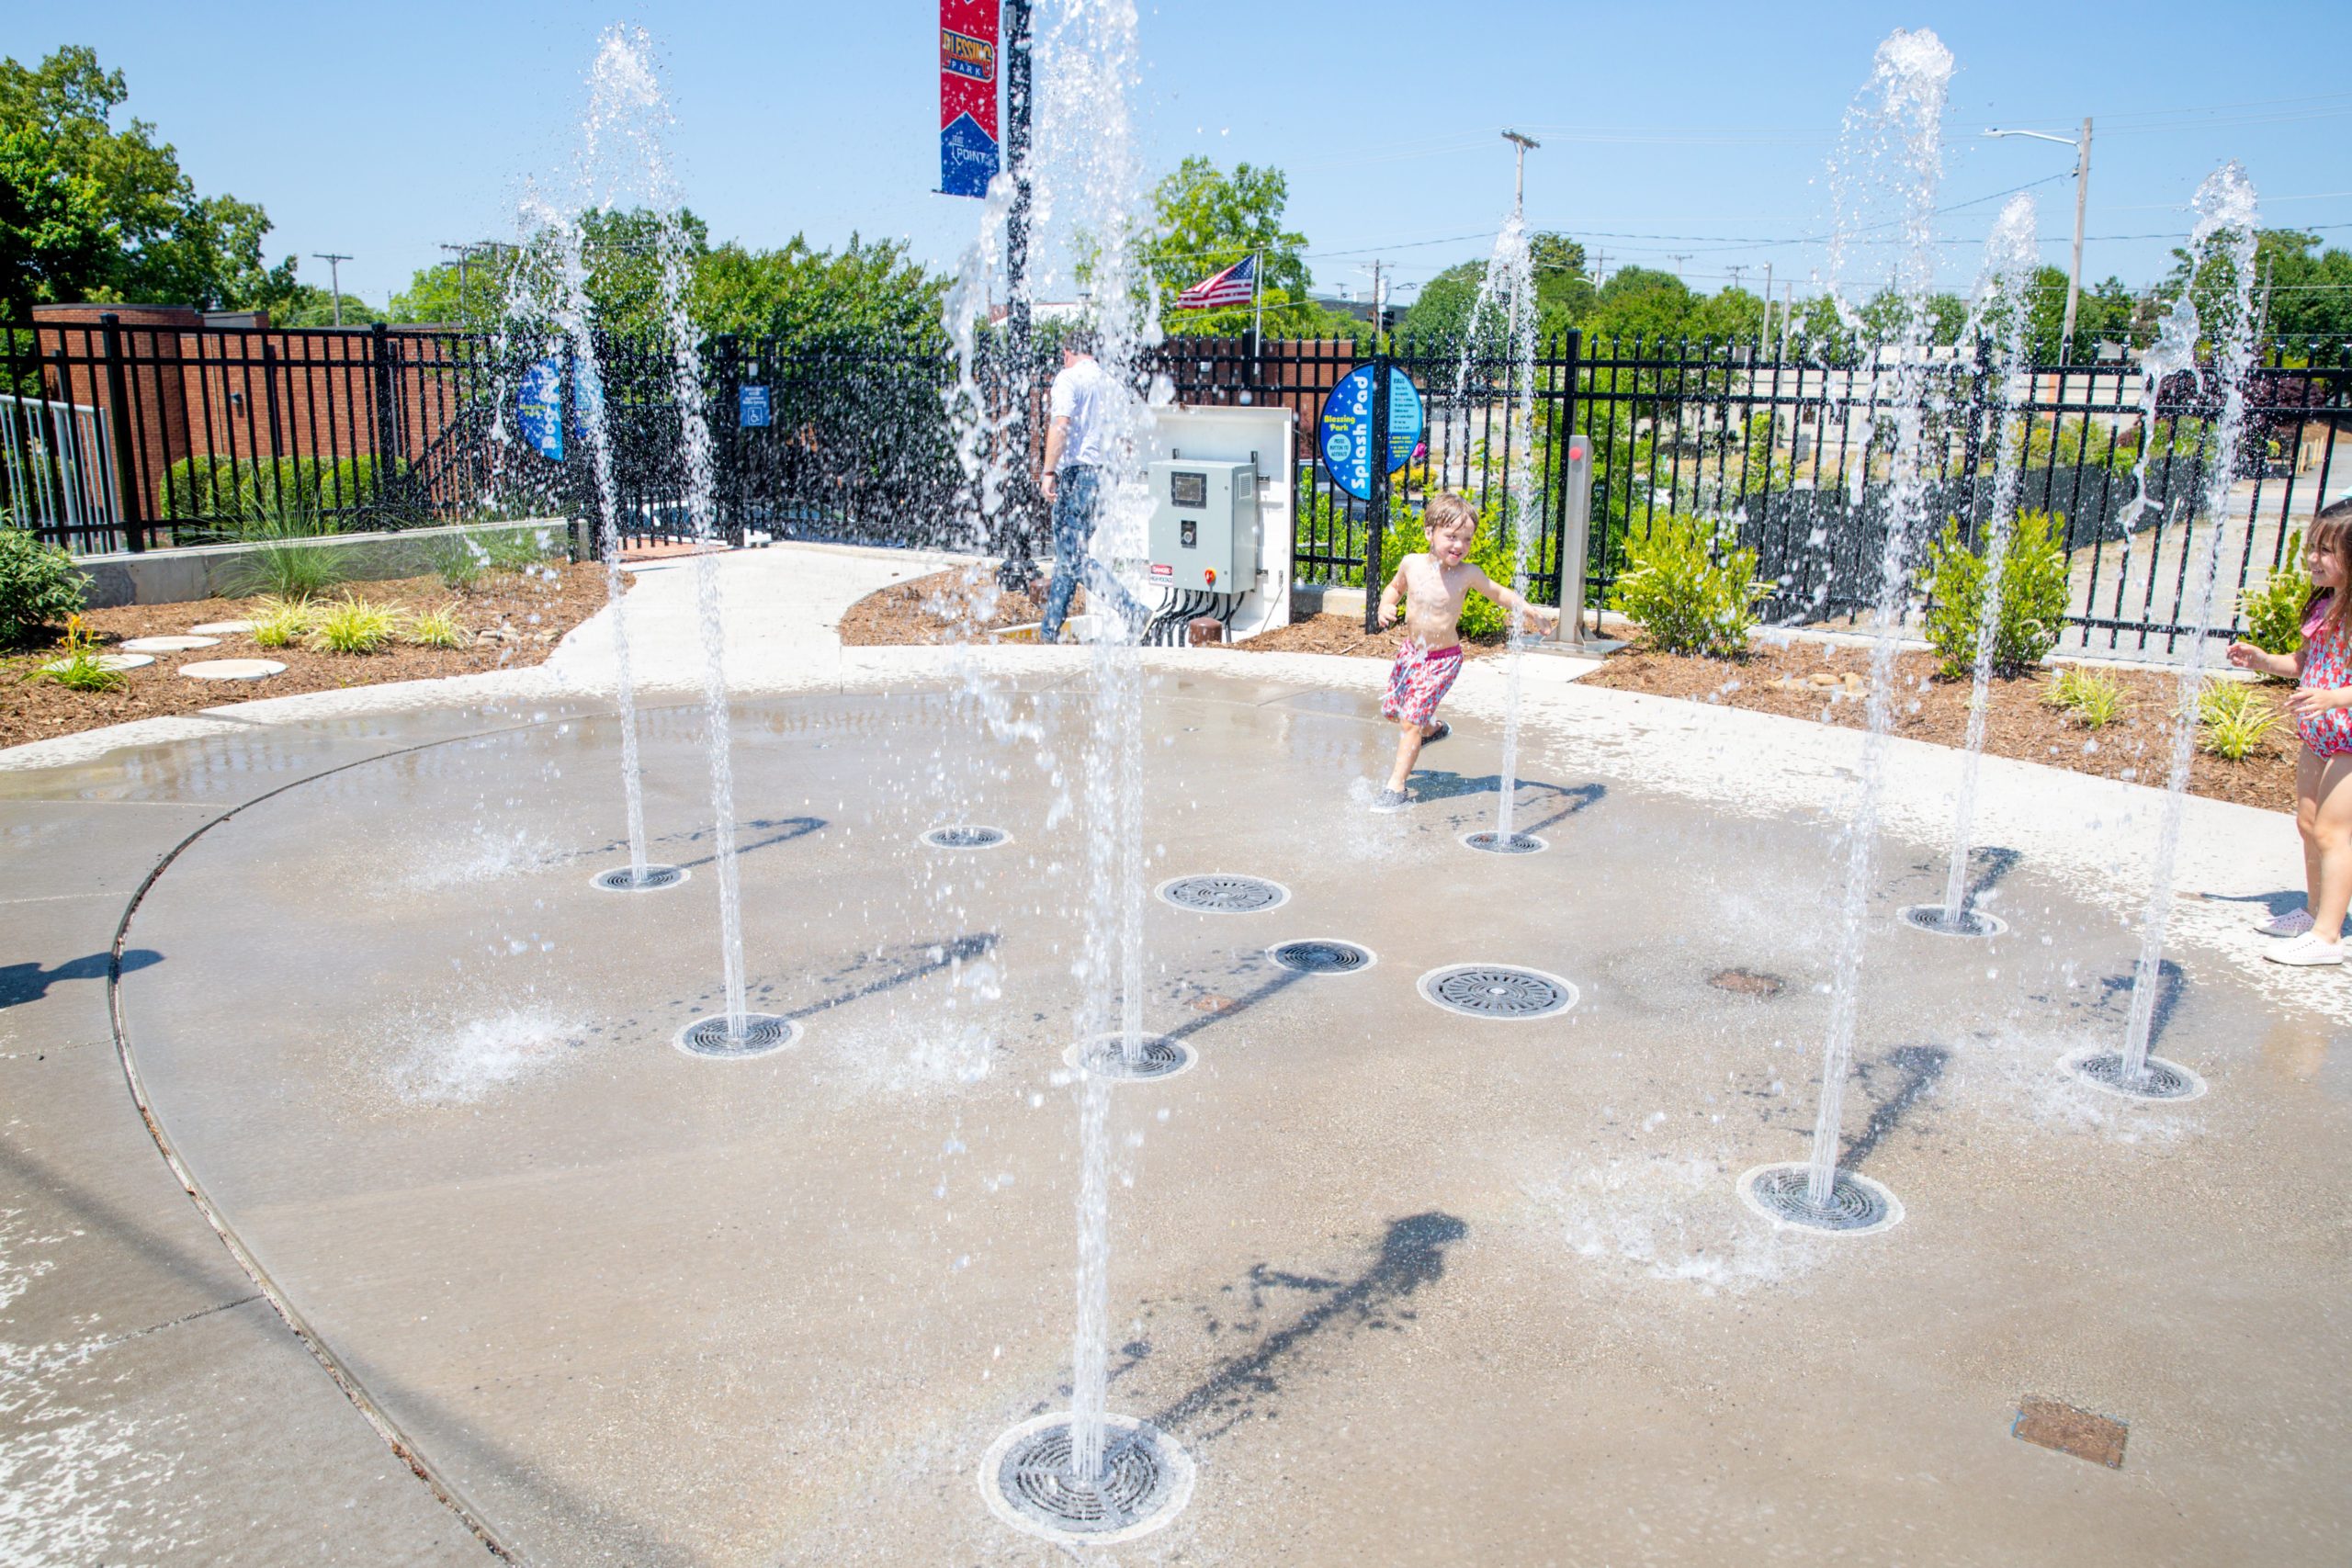 A splash pad at Blessing Park in High Point, NC, open for summer.